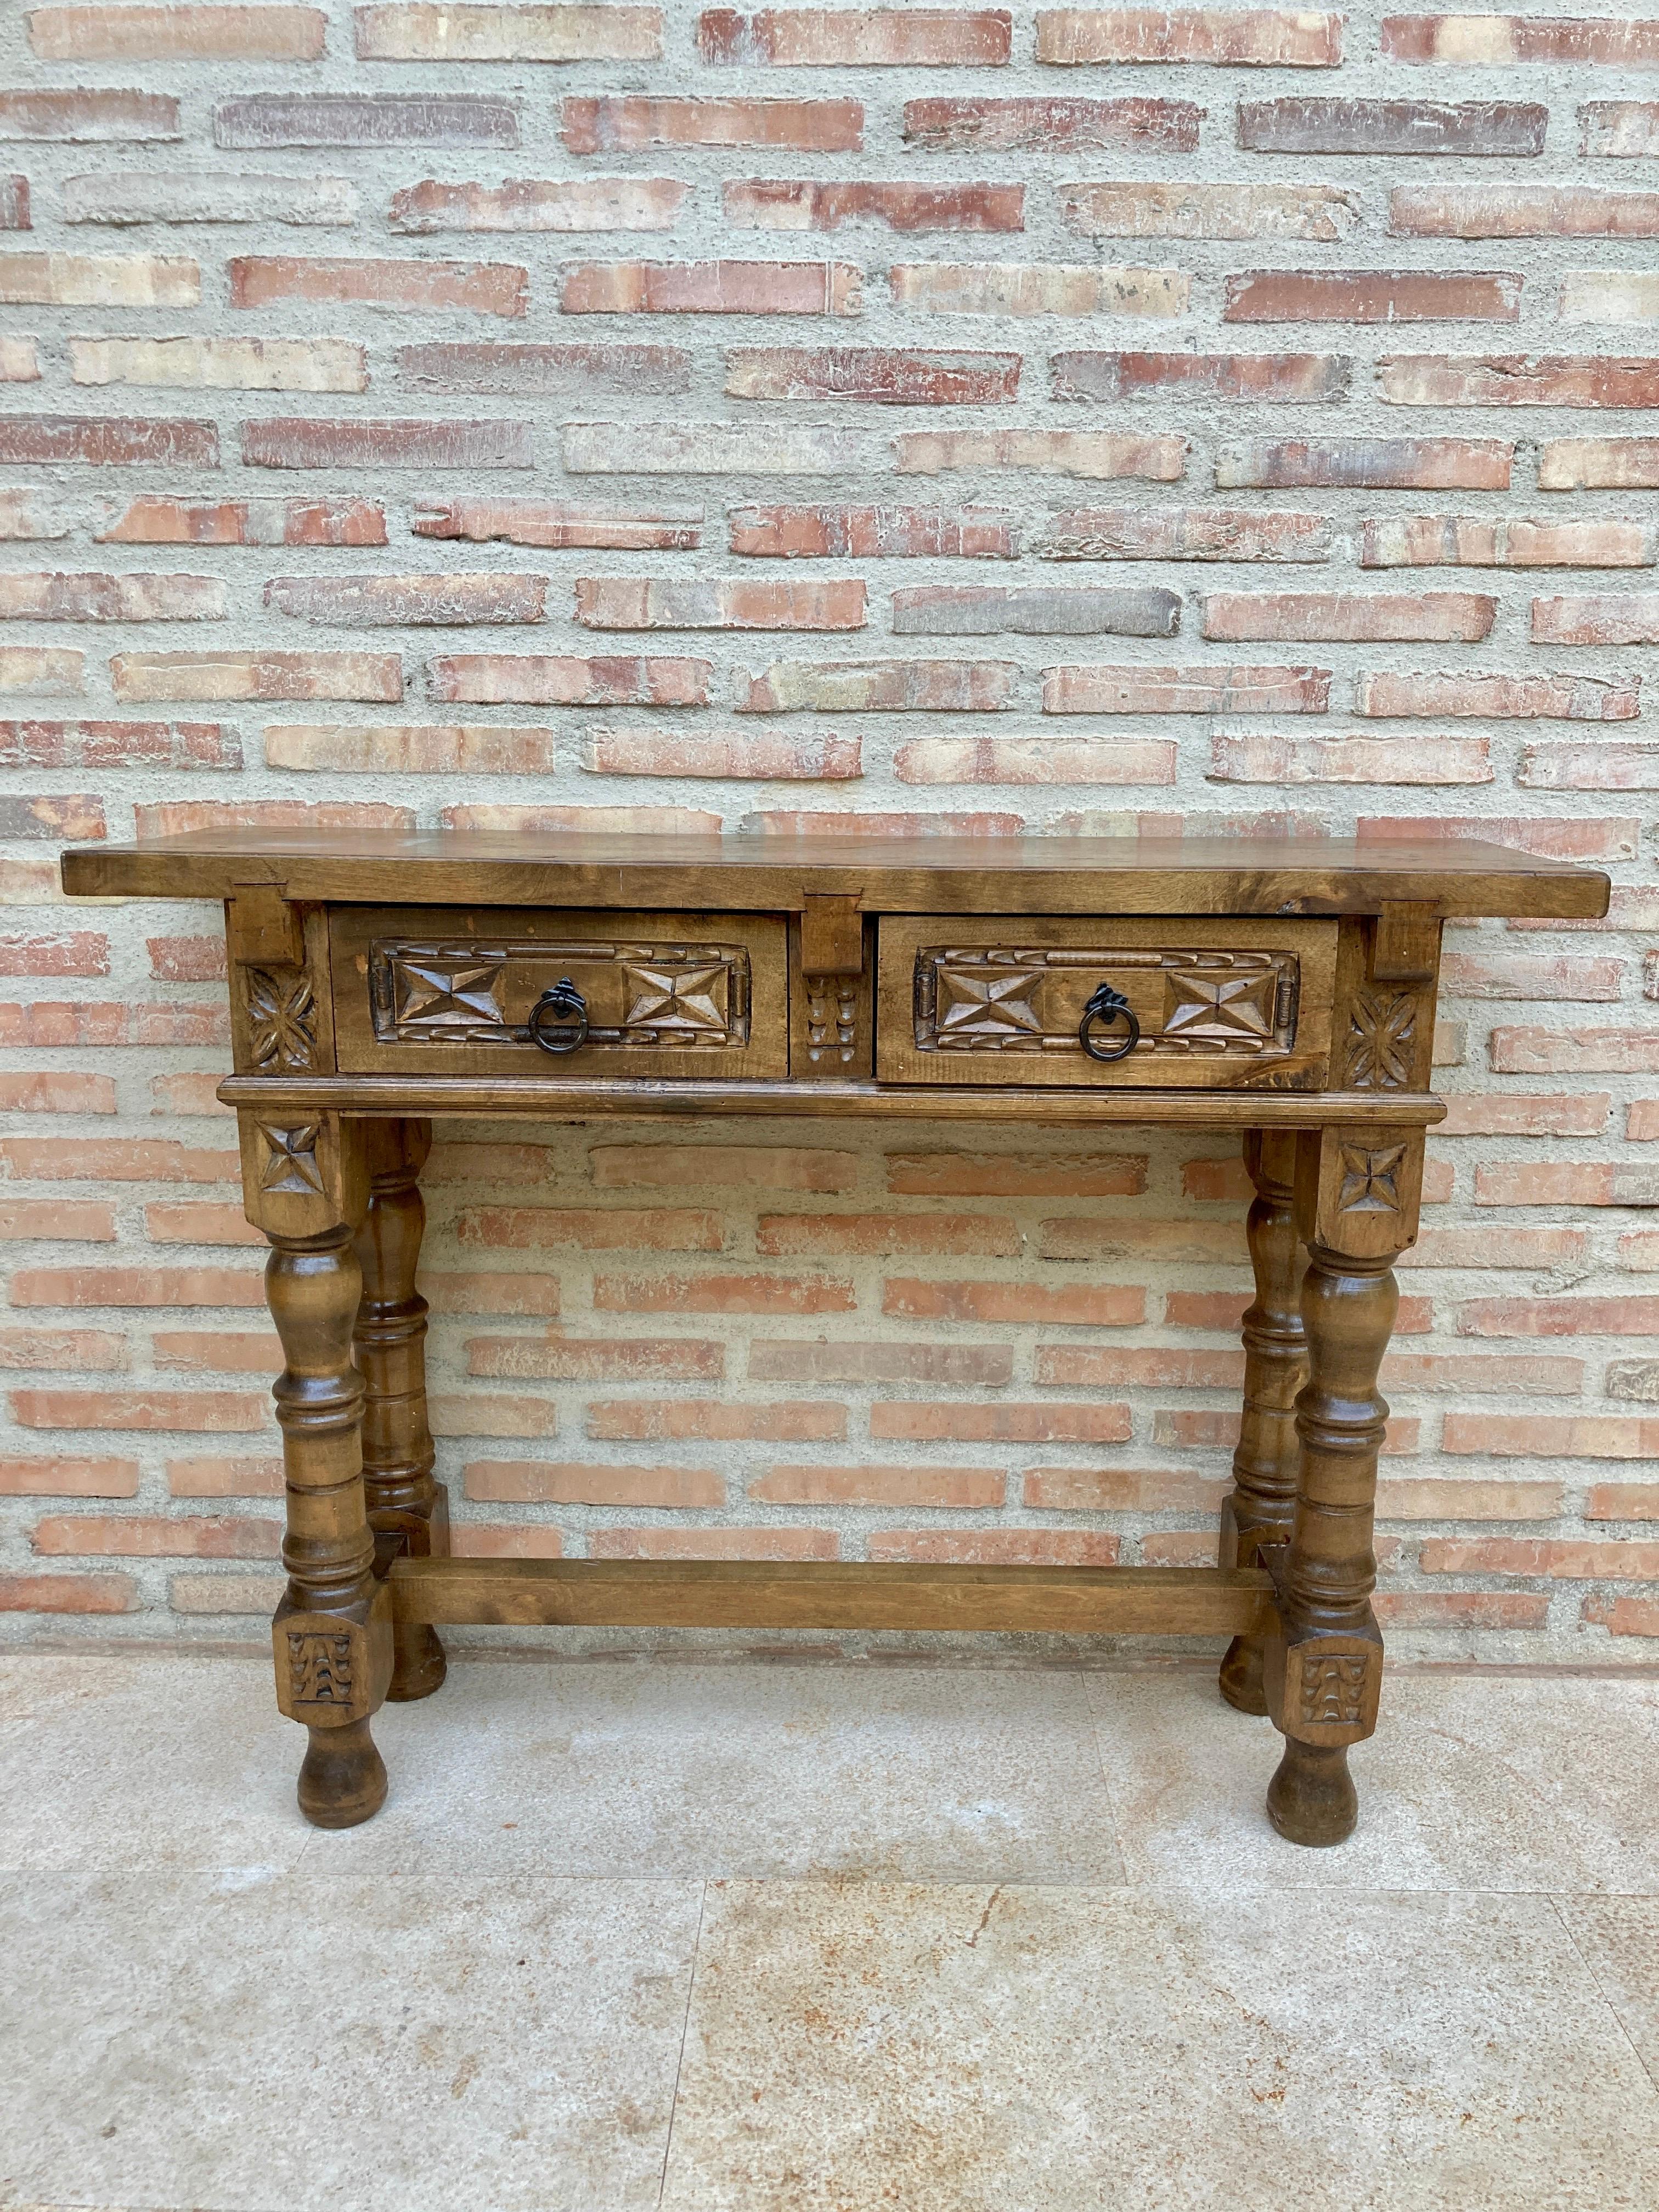 Vintage Design
This characterful table is of rare narrow depth of 11in. It is characteristic of Spanish Baroque furniture with a thick single piece top, simple bold chip carved ornament and bold turnings. It has a rich lustrous patina. The thick